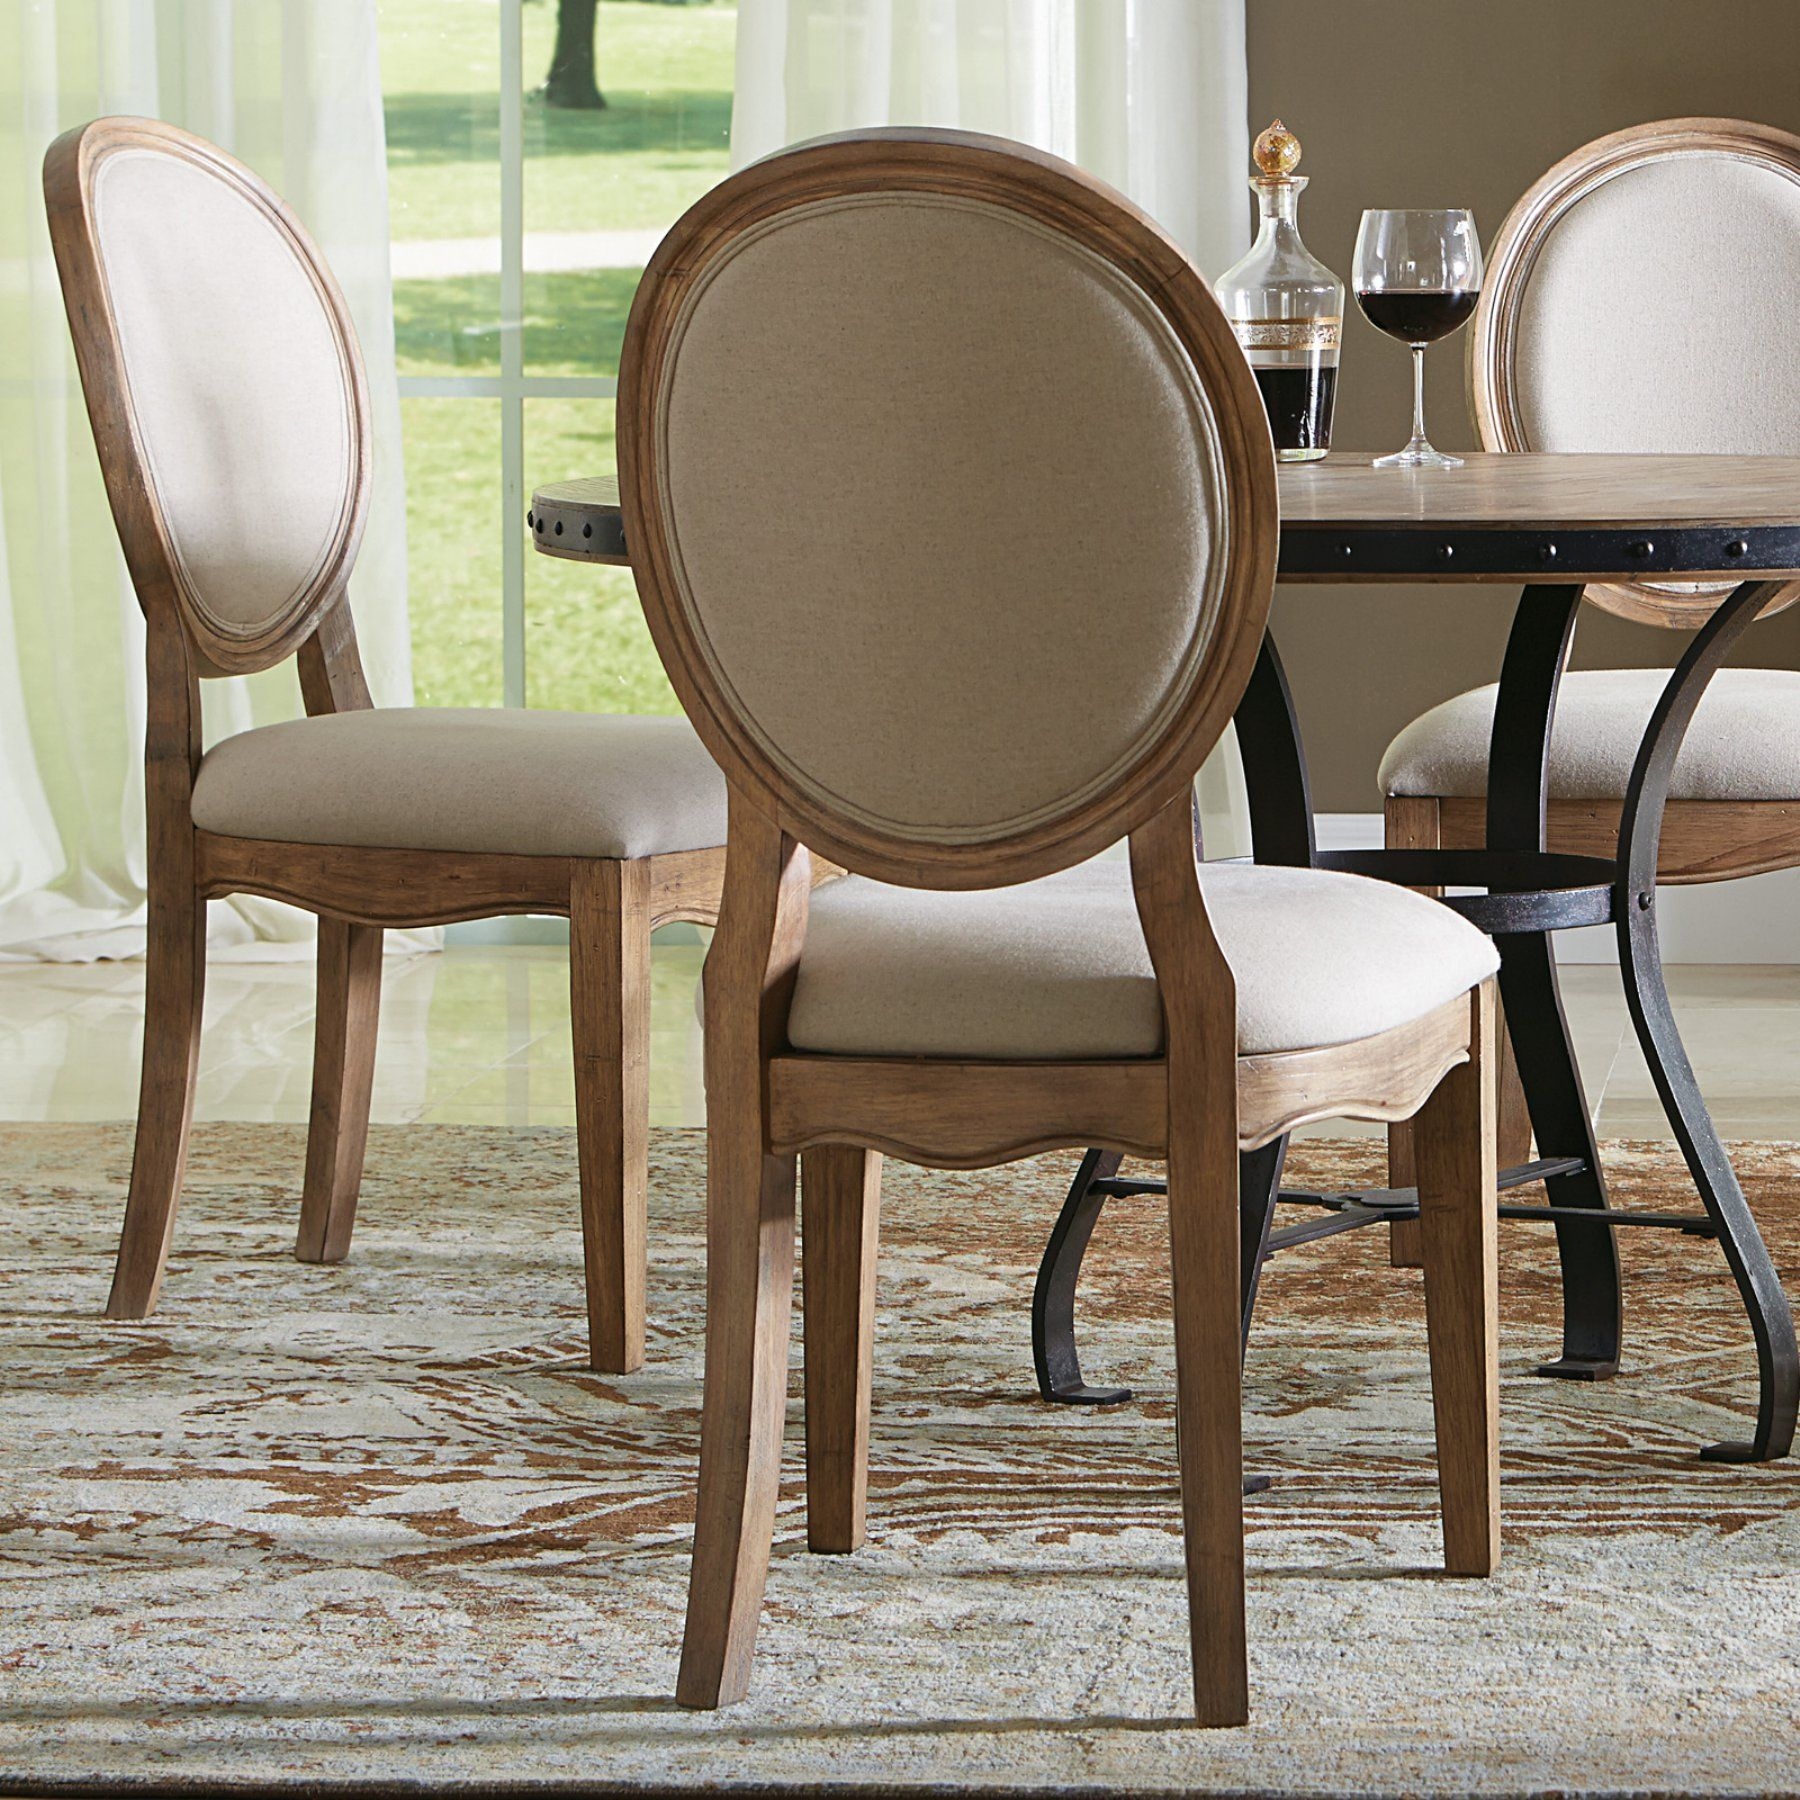 Round Back Dining Chairs Visualhunt, Round Back Dining Chair Seat Covers